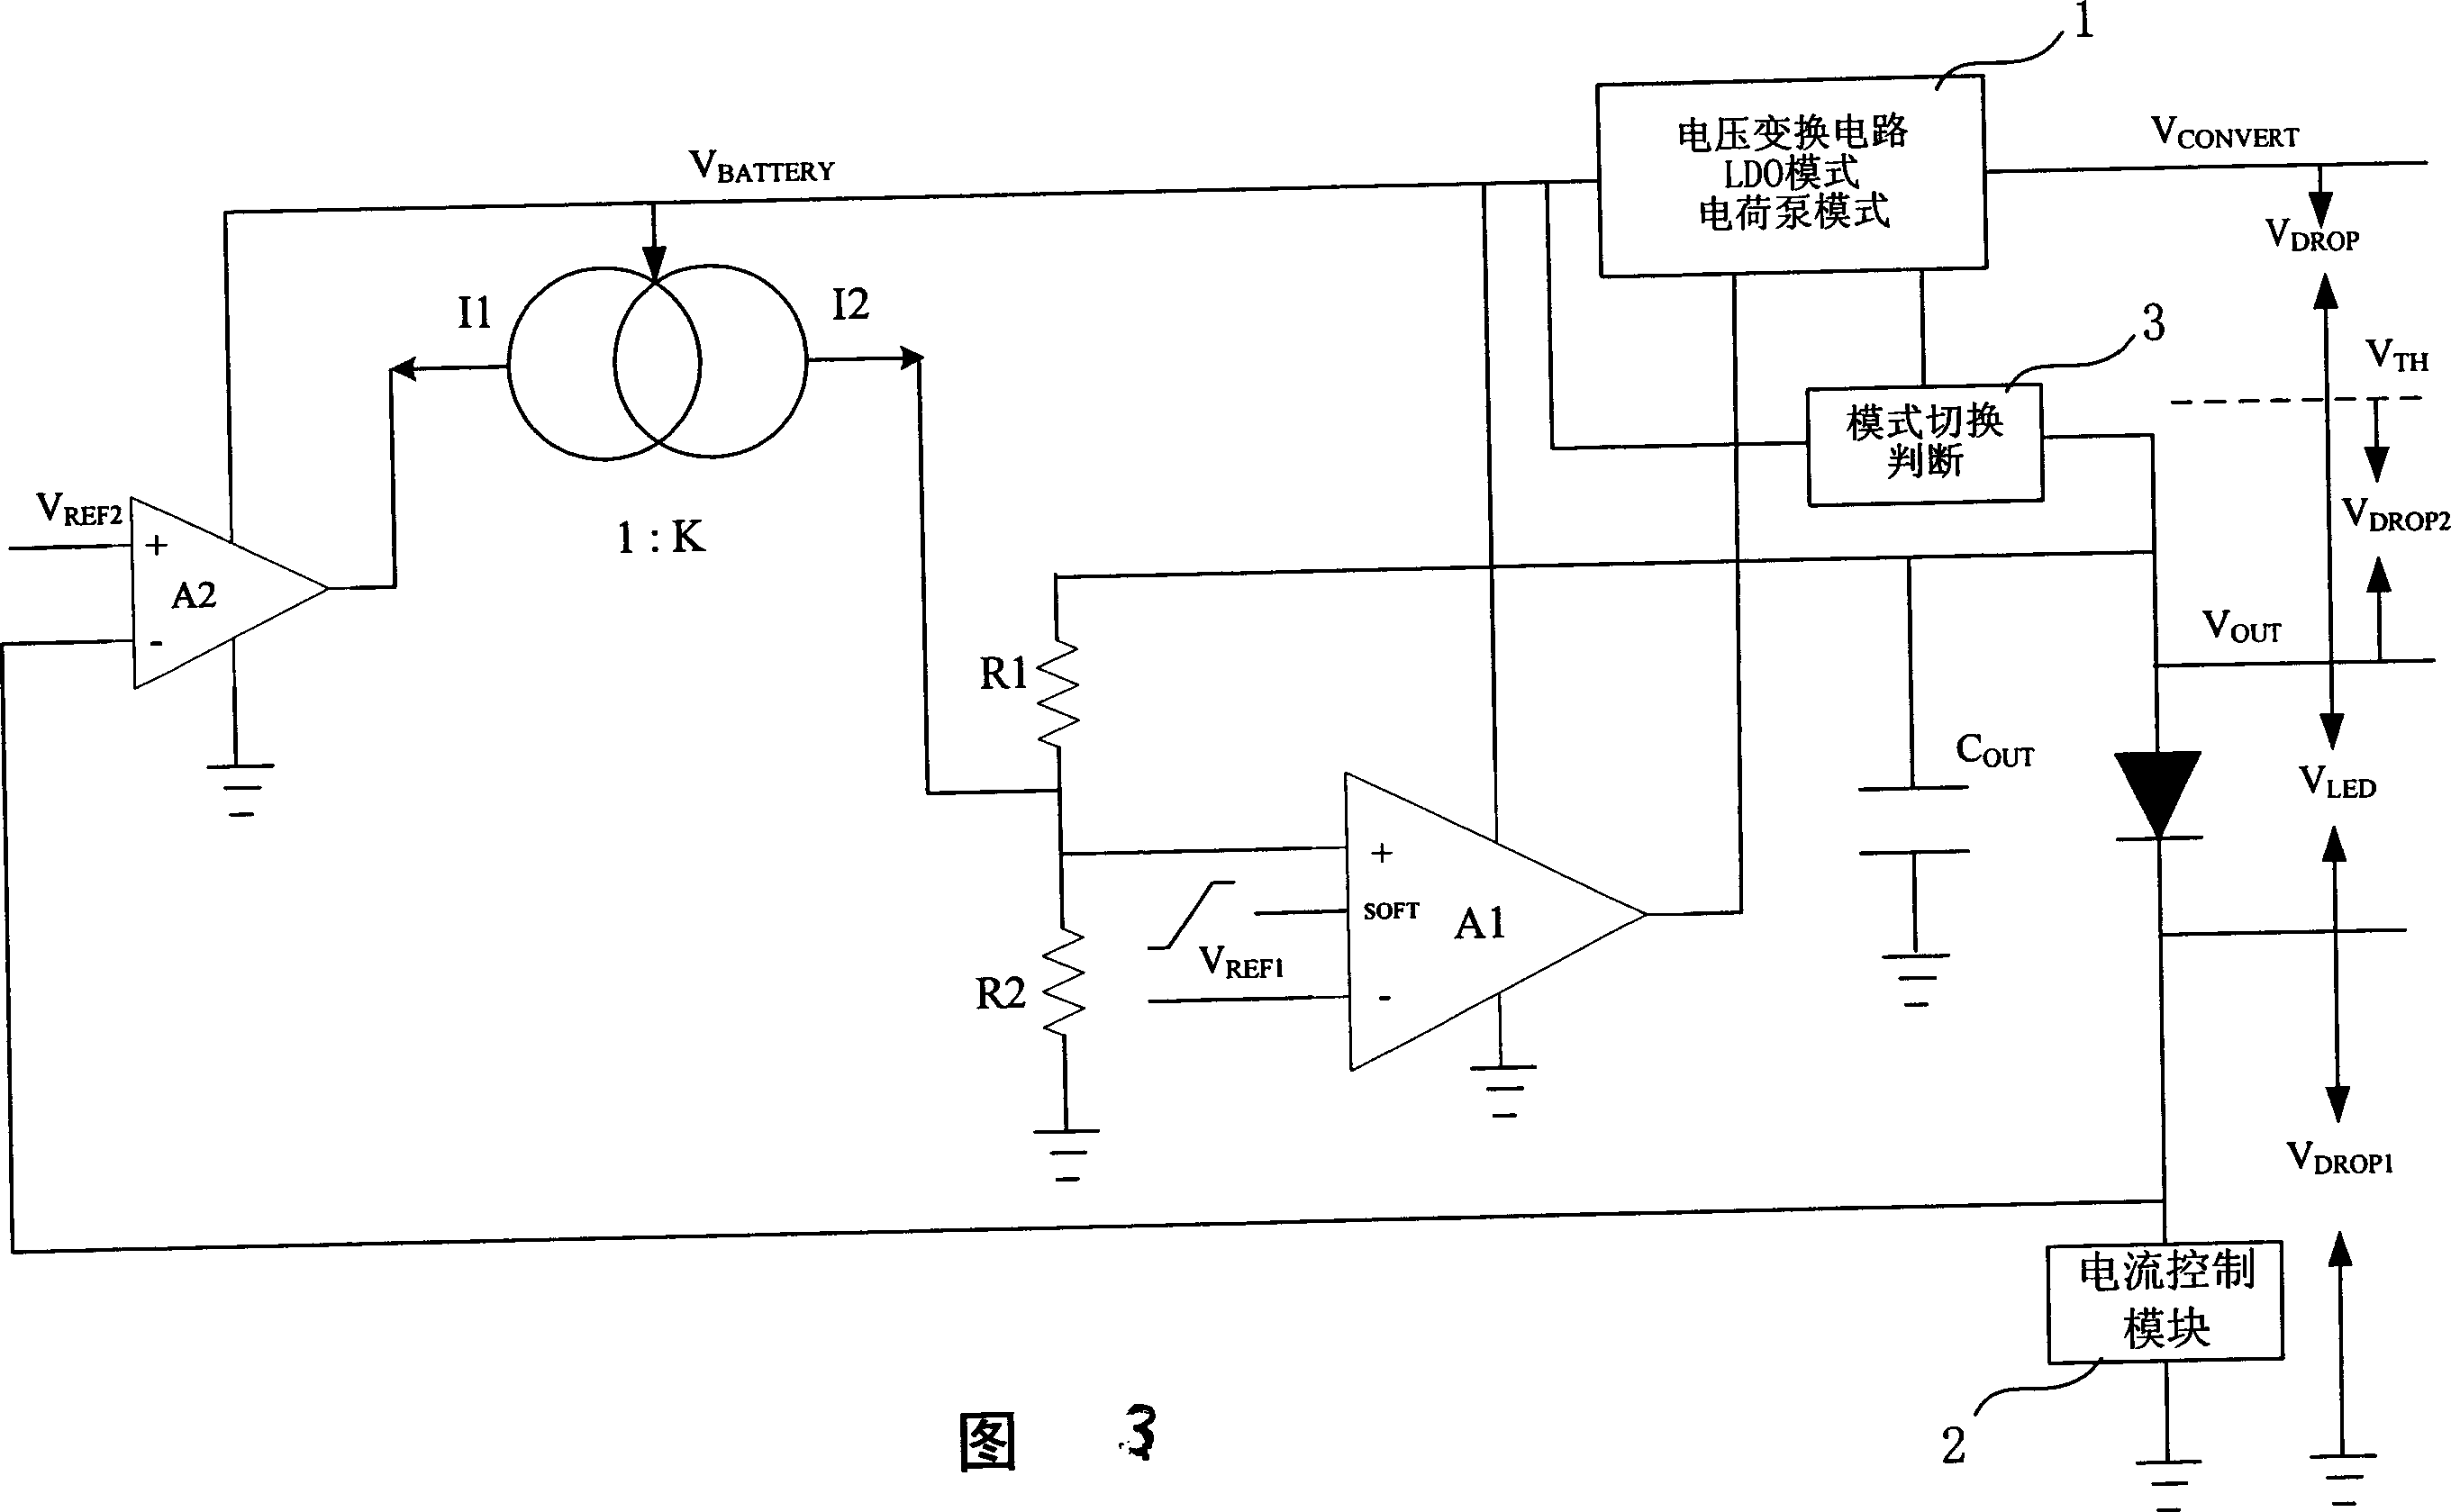 Parallel connection LED drive circuit with adaptive mode switching